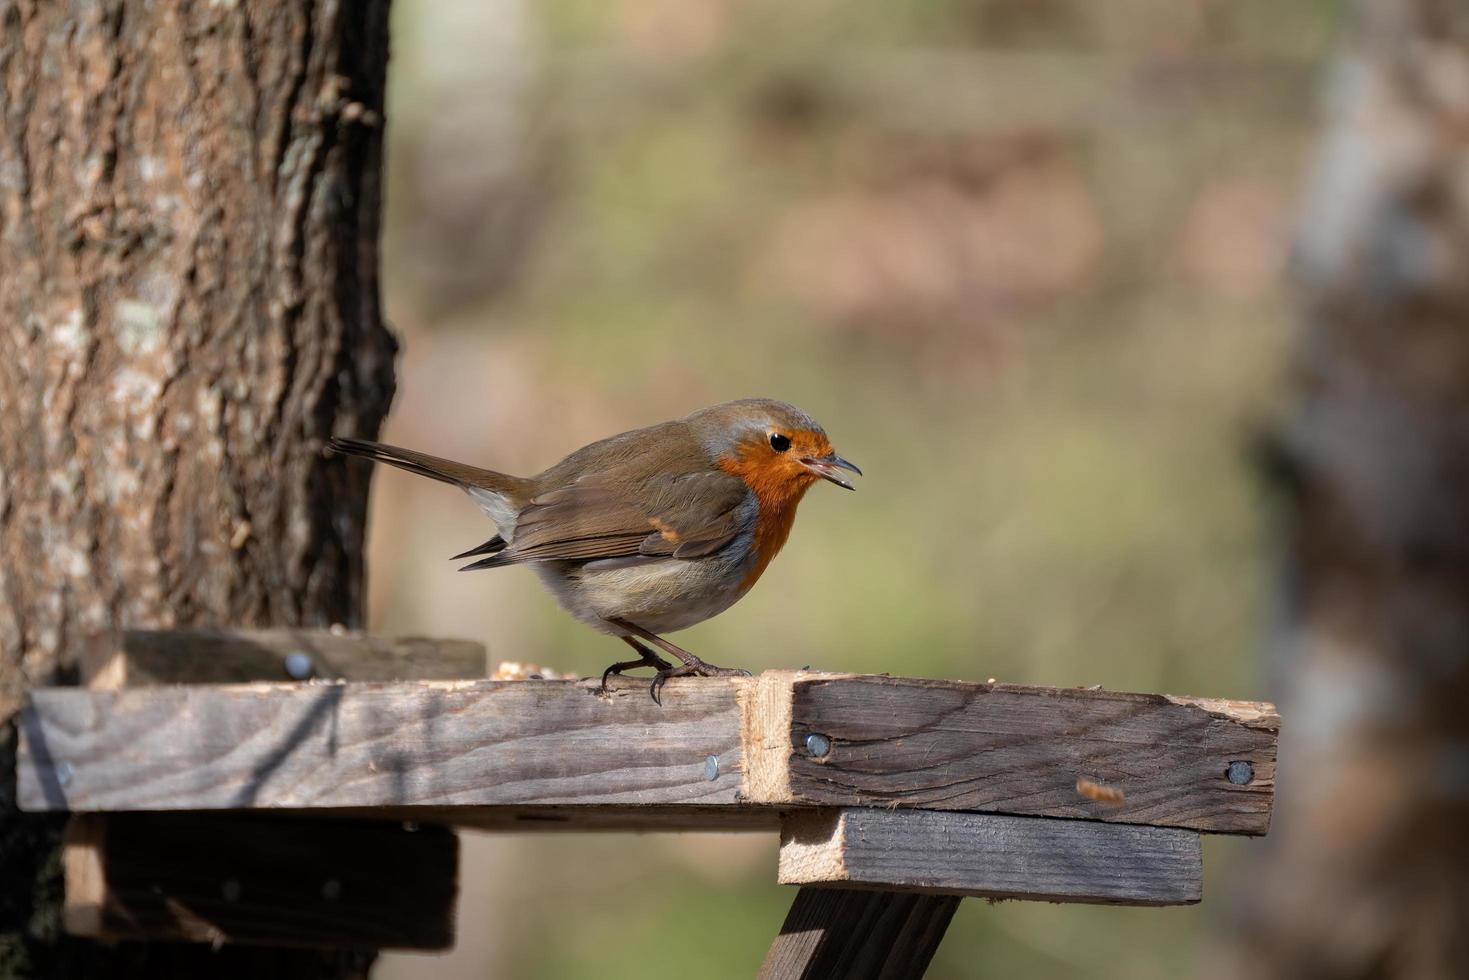 Close-up of an alert Robin standing on wooden table photo